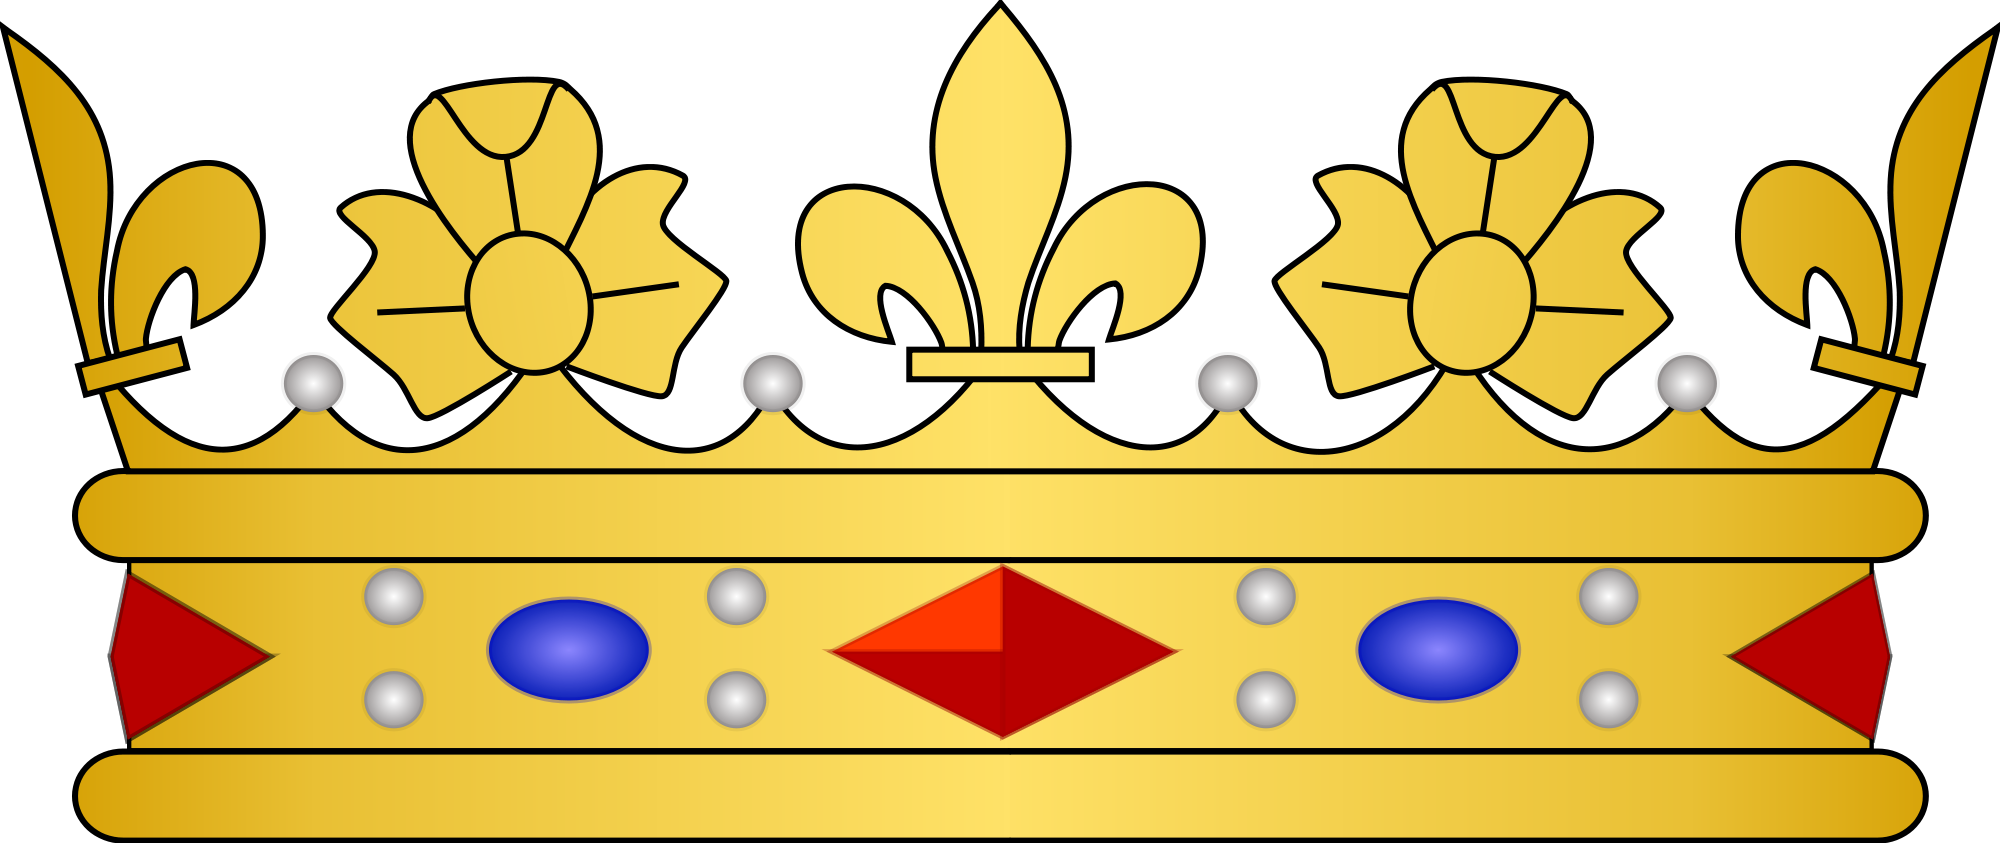 French Heraldic Crowns - Prince Crown Cut Out (2000x843)